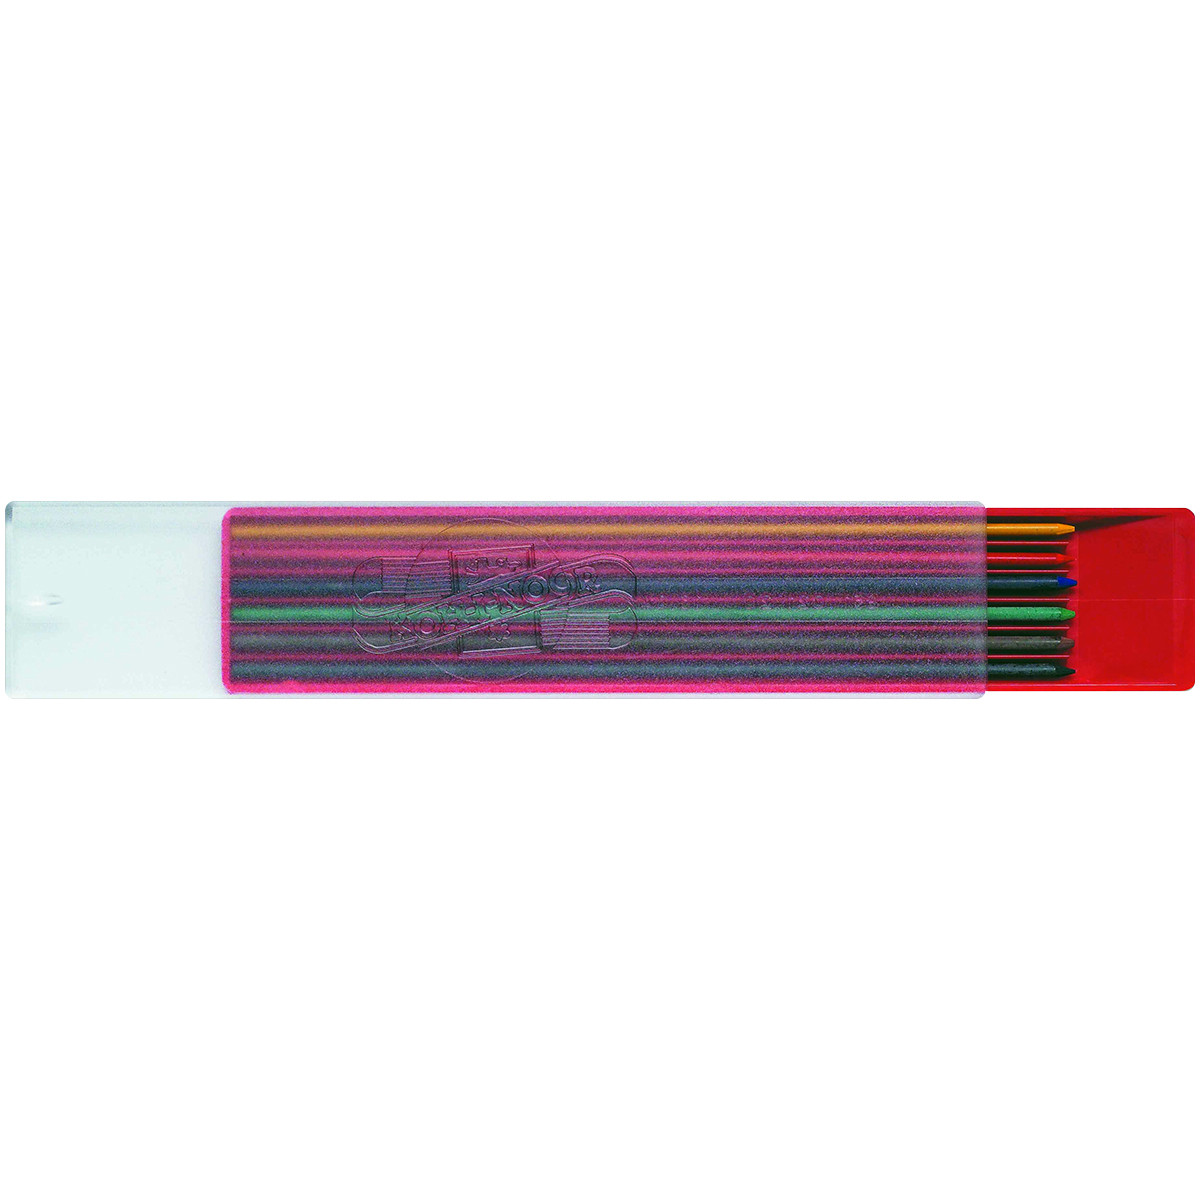 Koh-I-Noor 4301 Coloured Leads - 2.0mm x 120mm - Assorted Colours (Pack of 6)